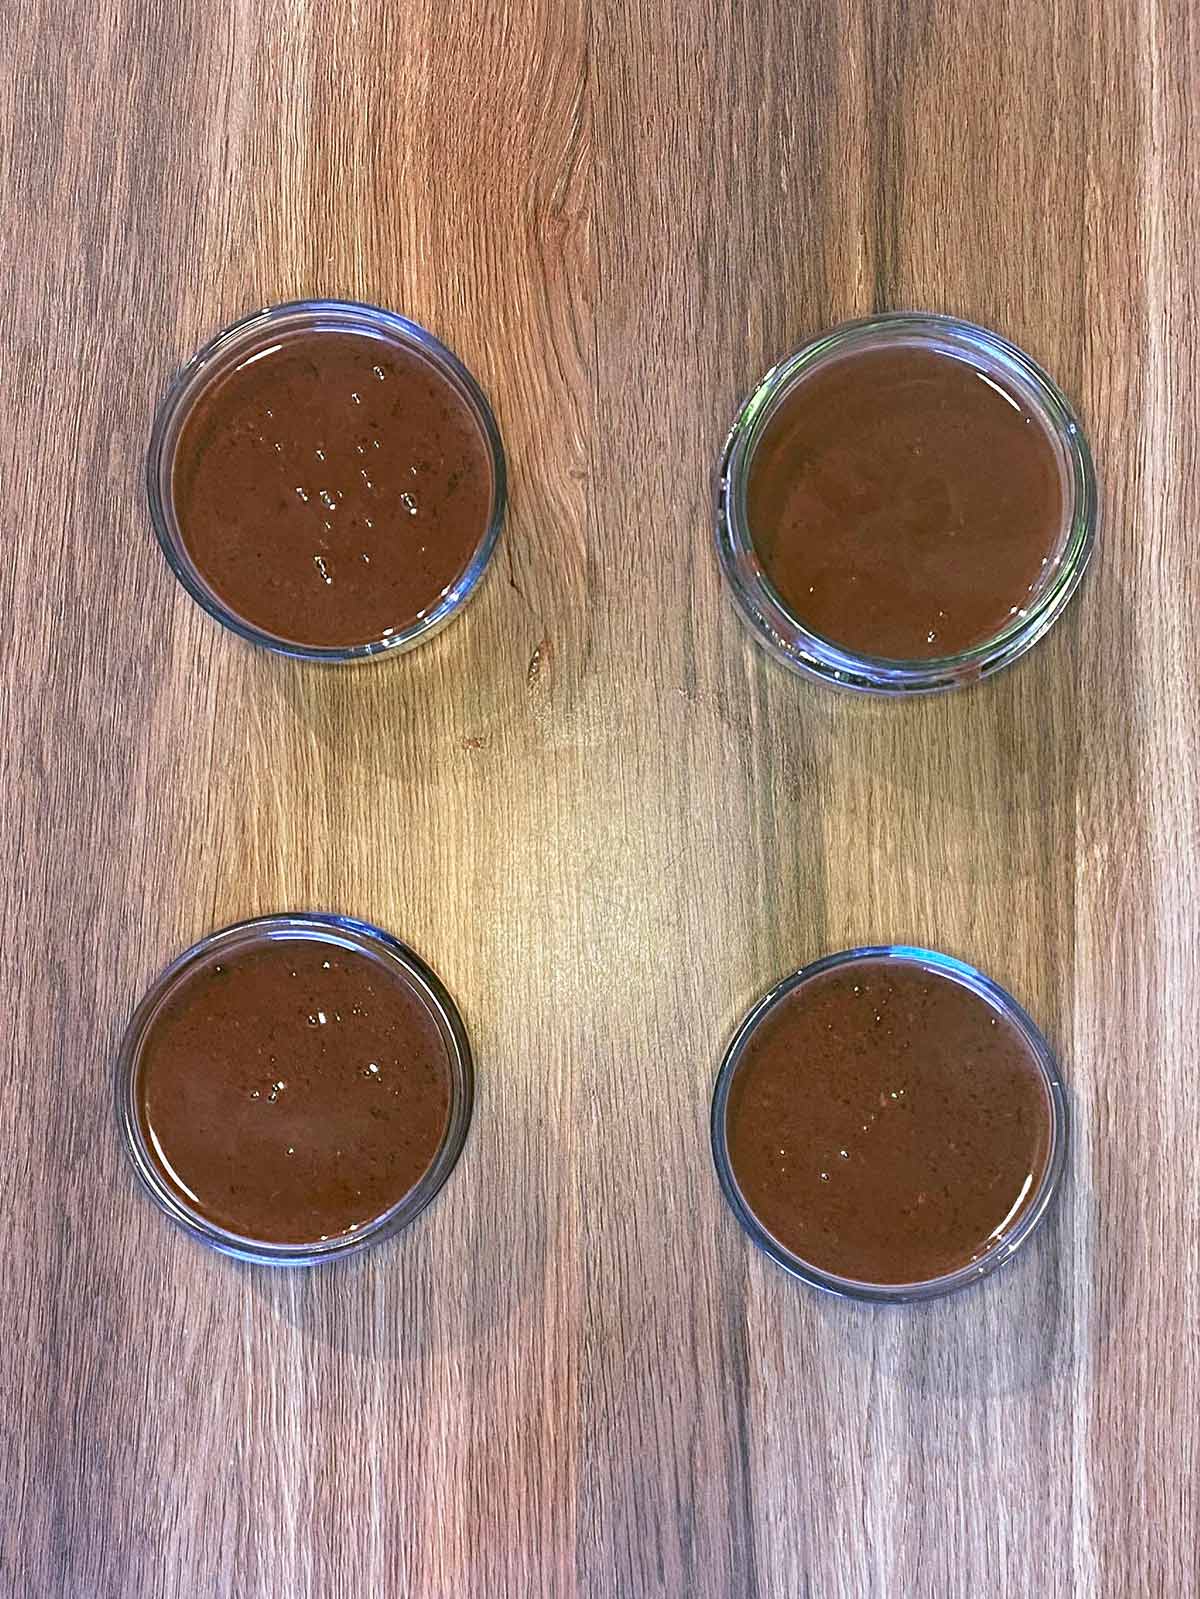 Four glass ramekins filled with the chocolate mixture.